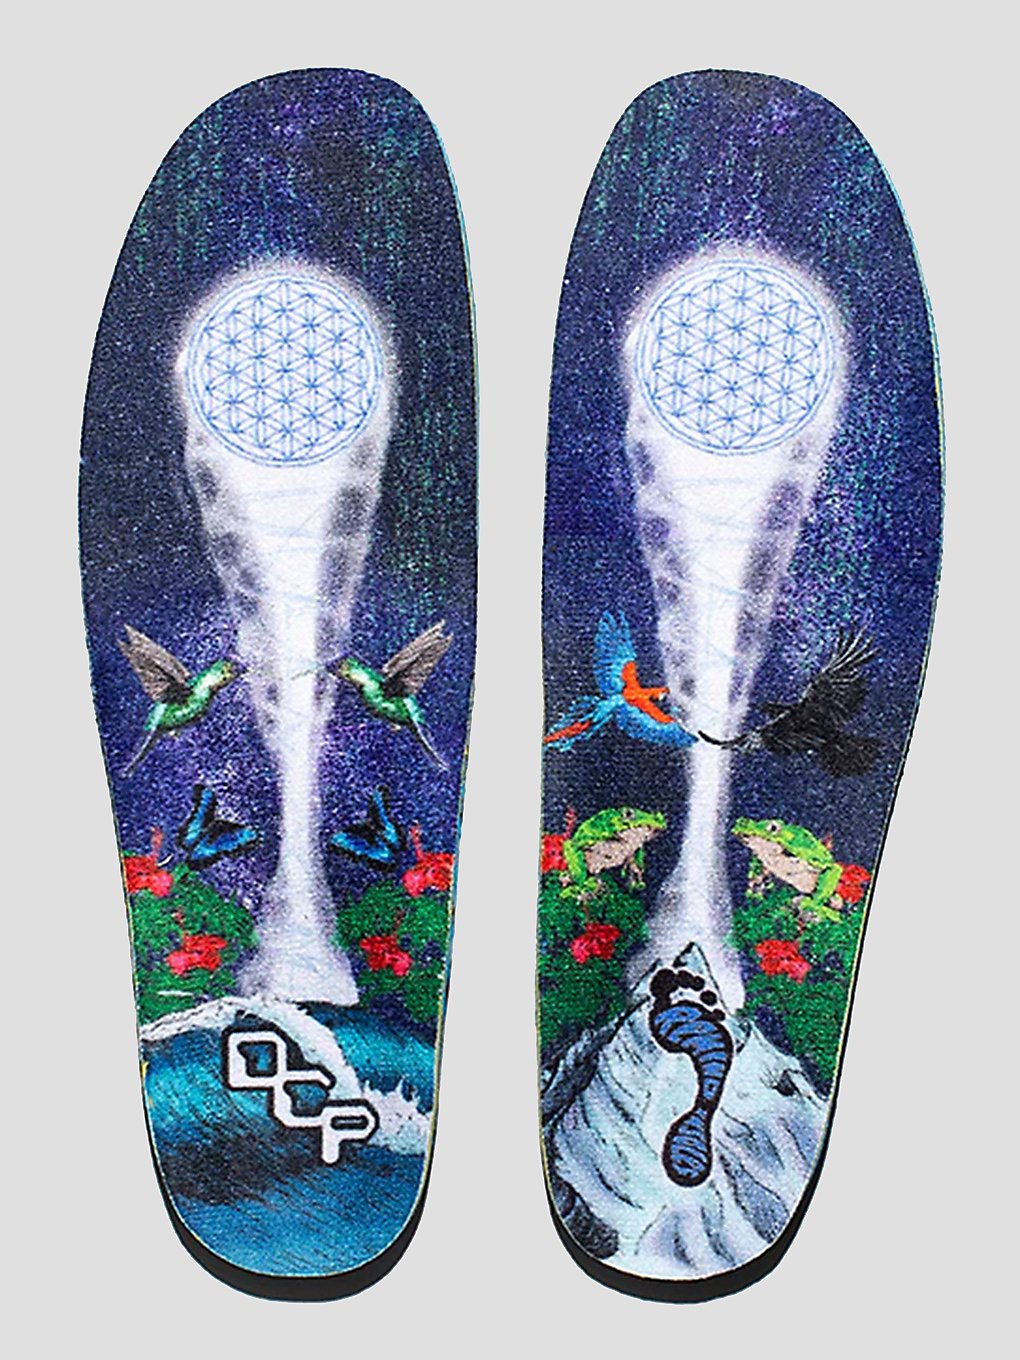 Remind Insoles Dcp Flower Of Life Insoles patroon